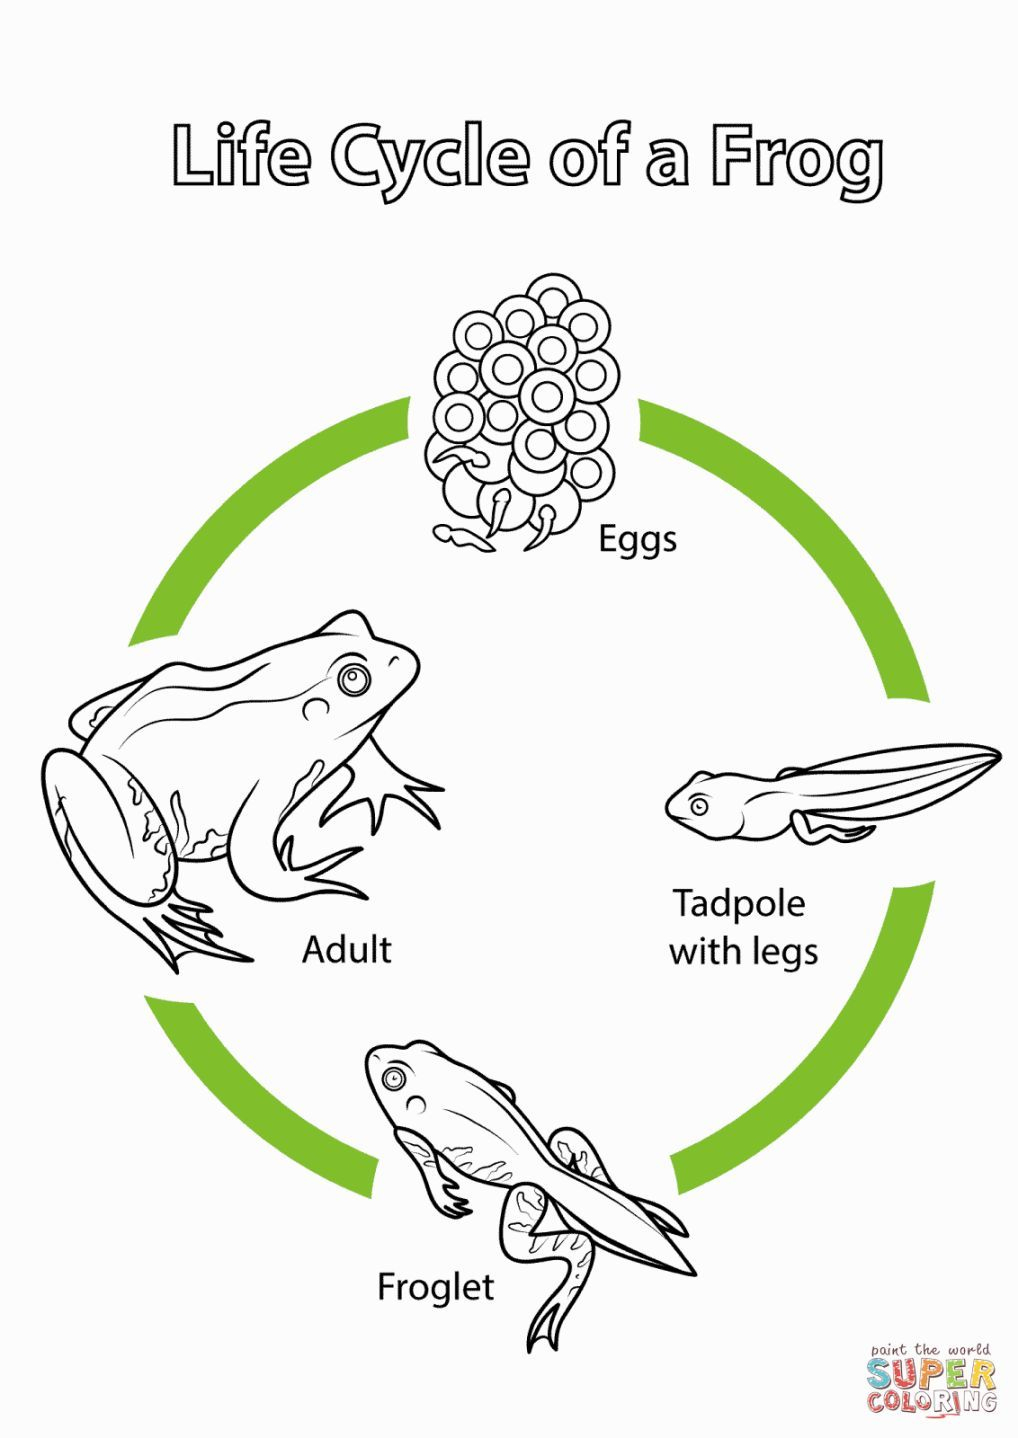 Frog Life Cycle Coloring Page | Coloring Pages | Pinterest | Frog - Life Cycle Of A Frog Free Printable Book